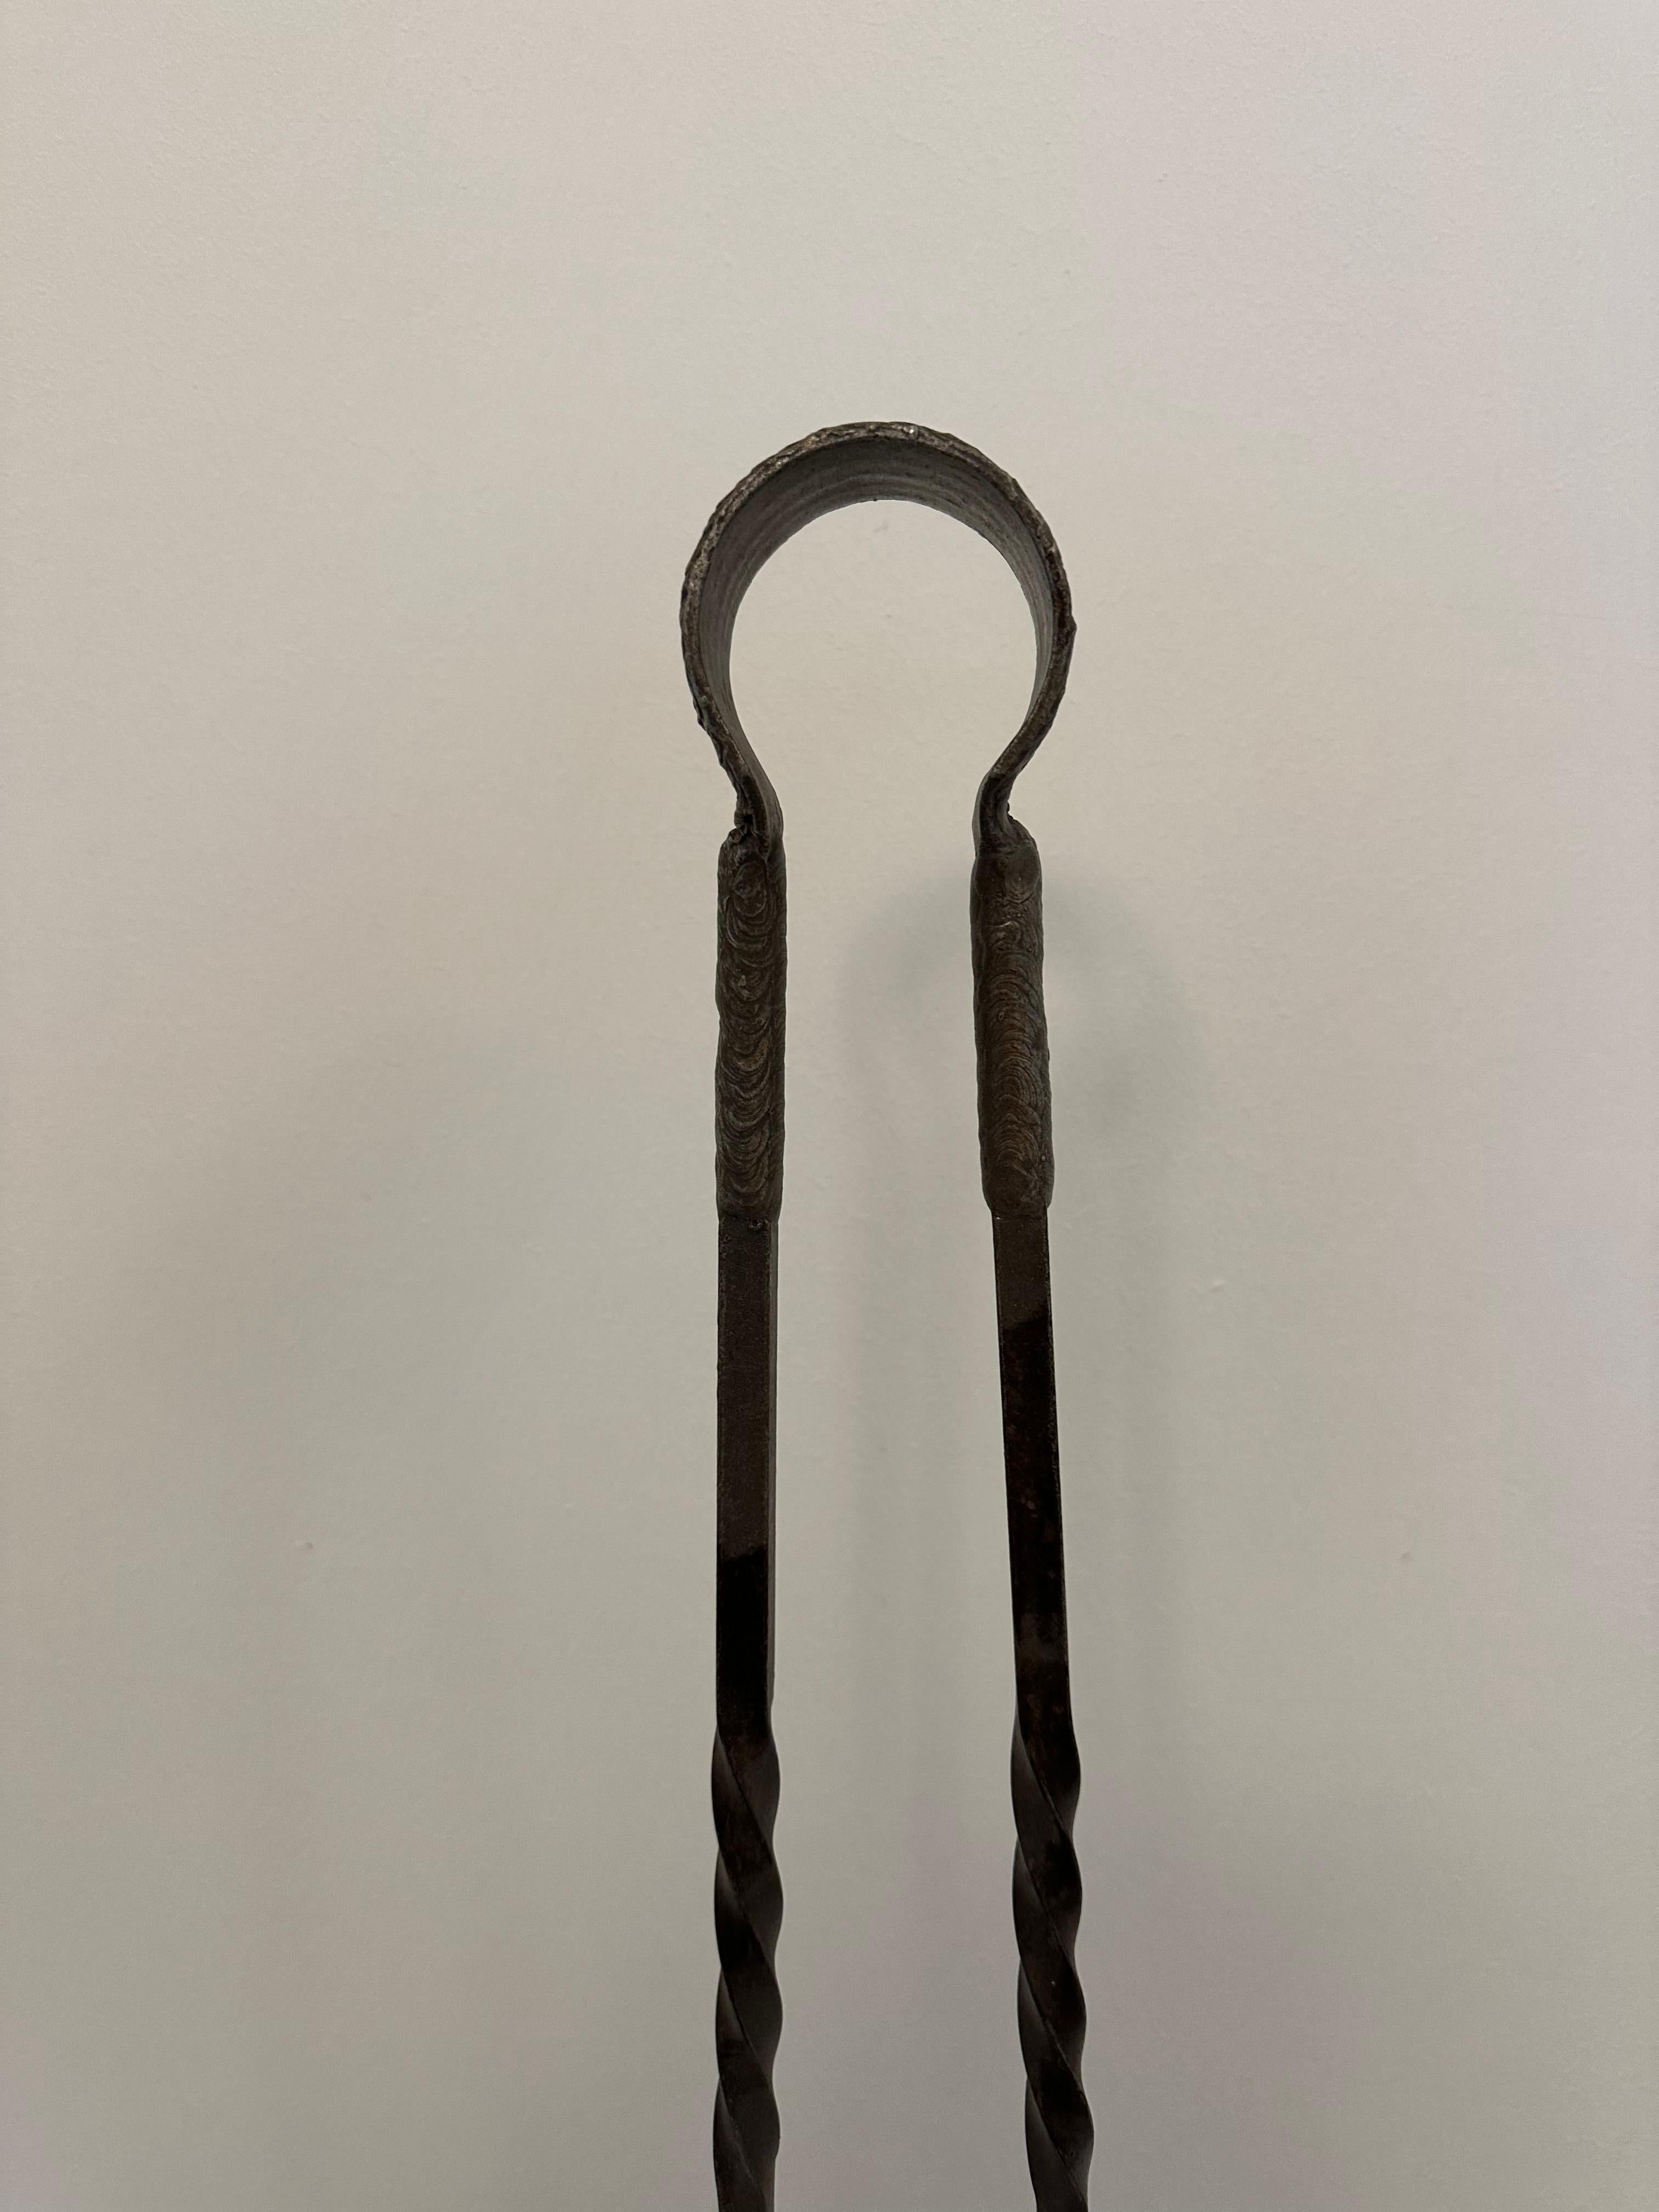 Huge 30.1 inch tall unusual hinged fire tongs.

Great decorative piece, very sturdy and suitable for handling big fire logs.
